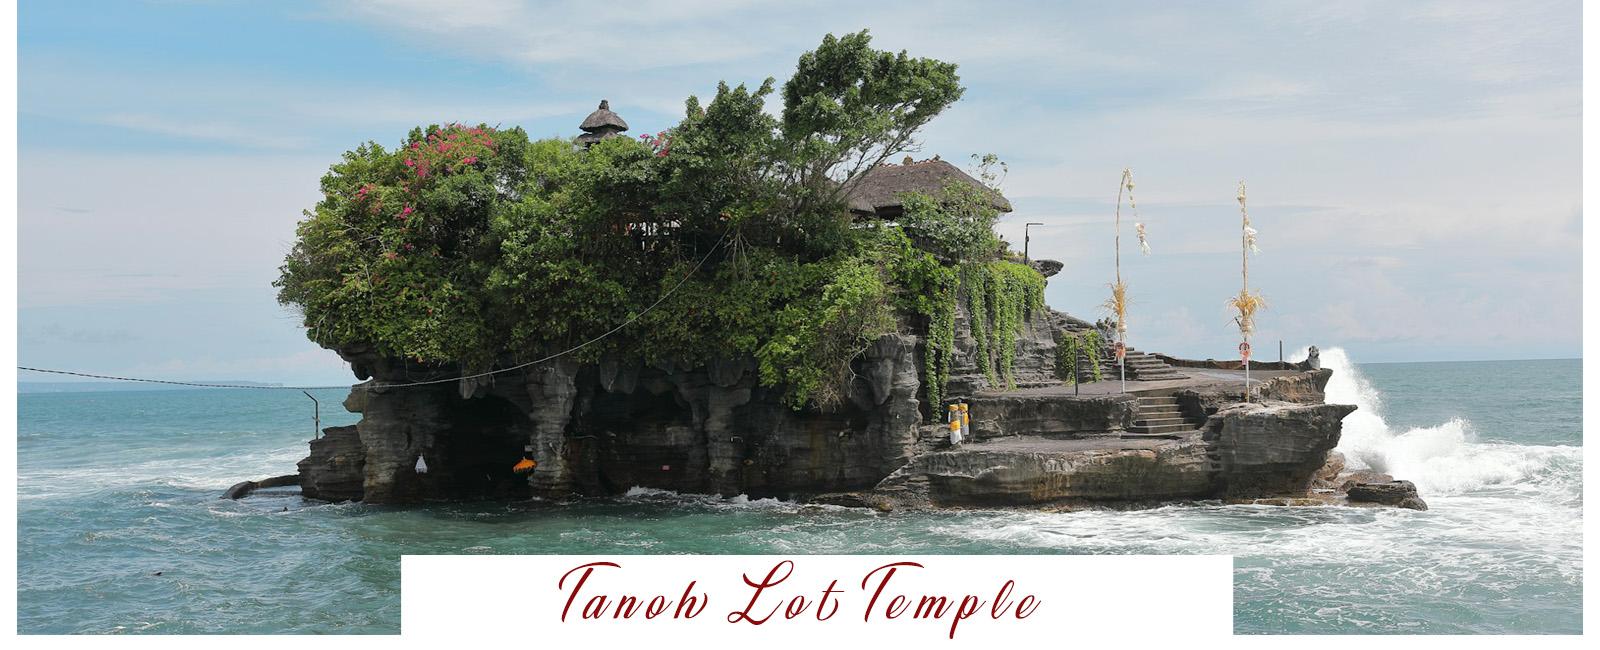 Bali Indonesia Tour Package